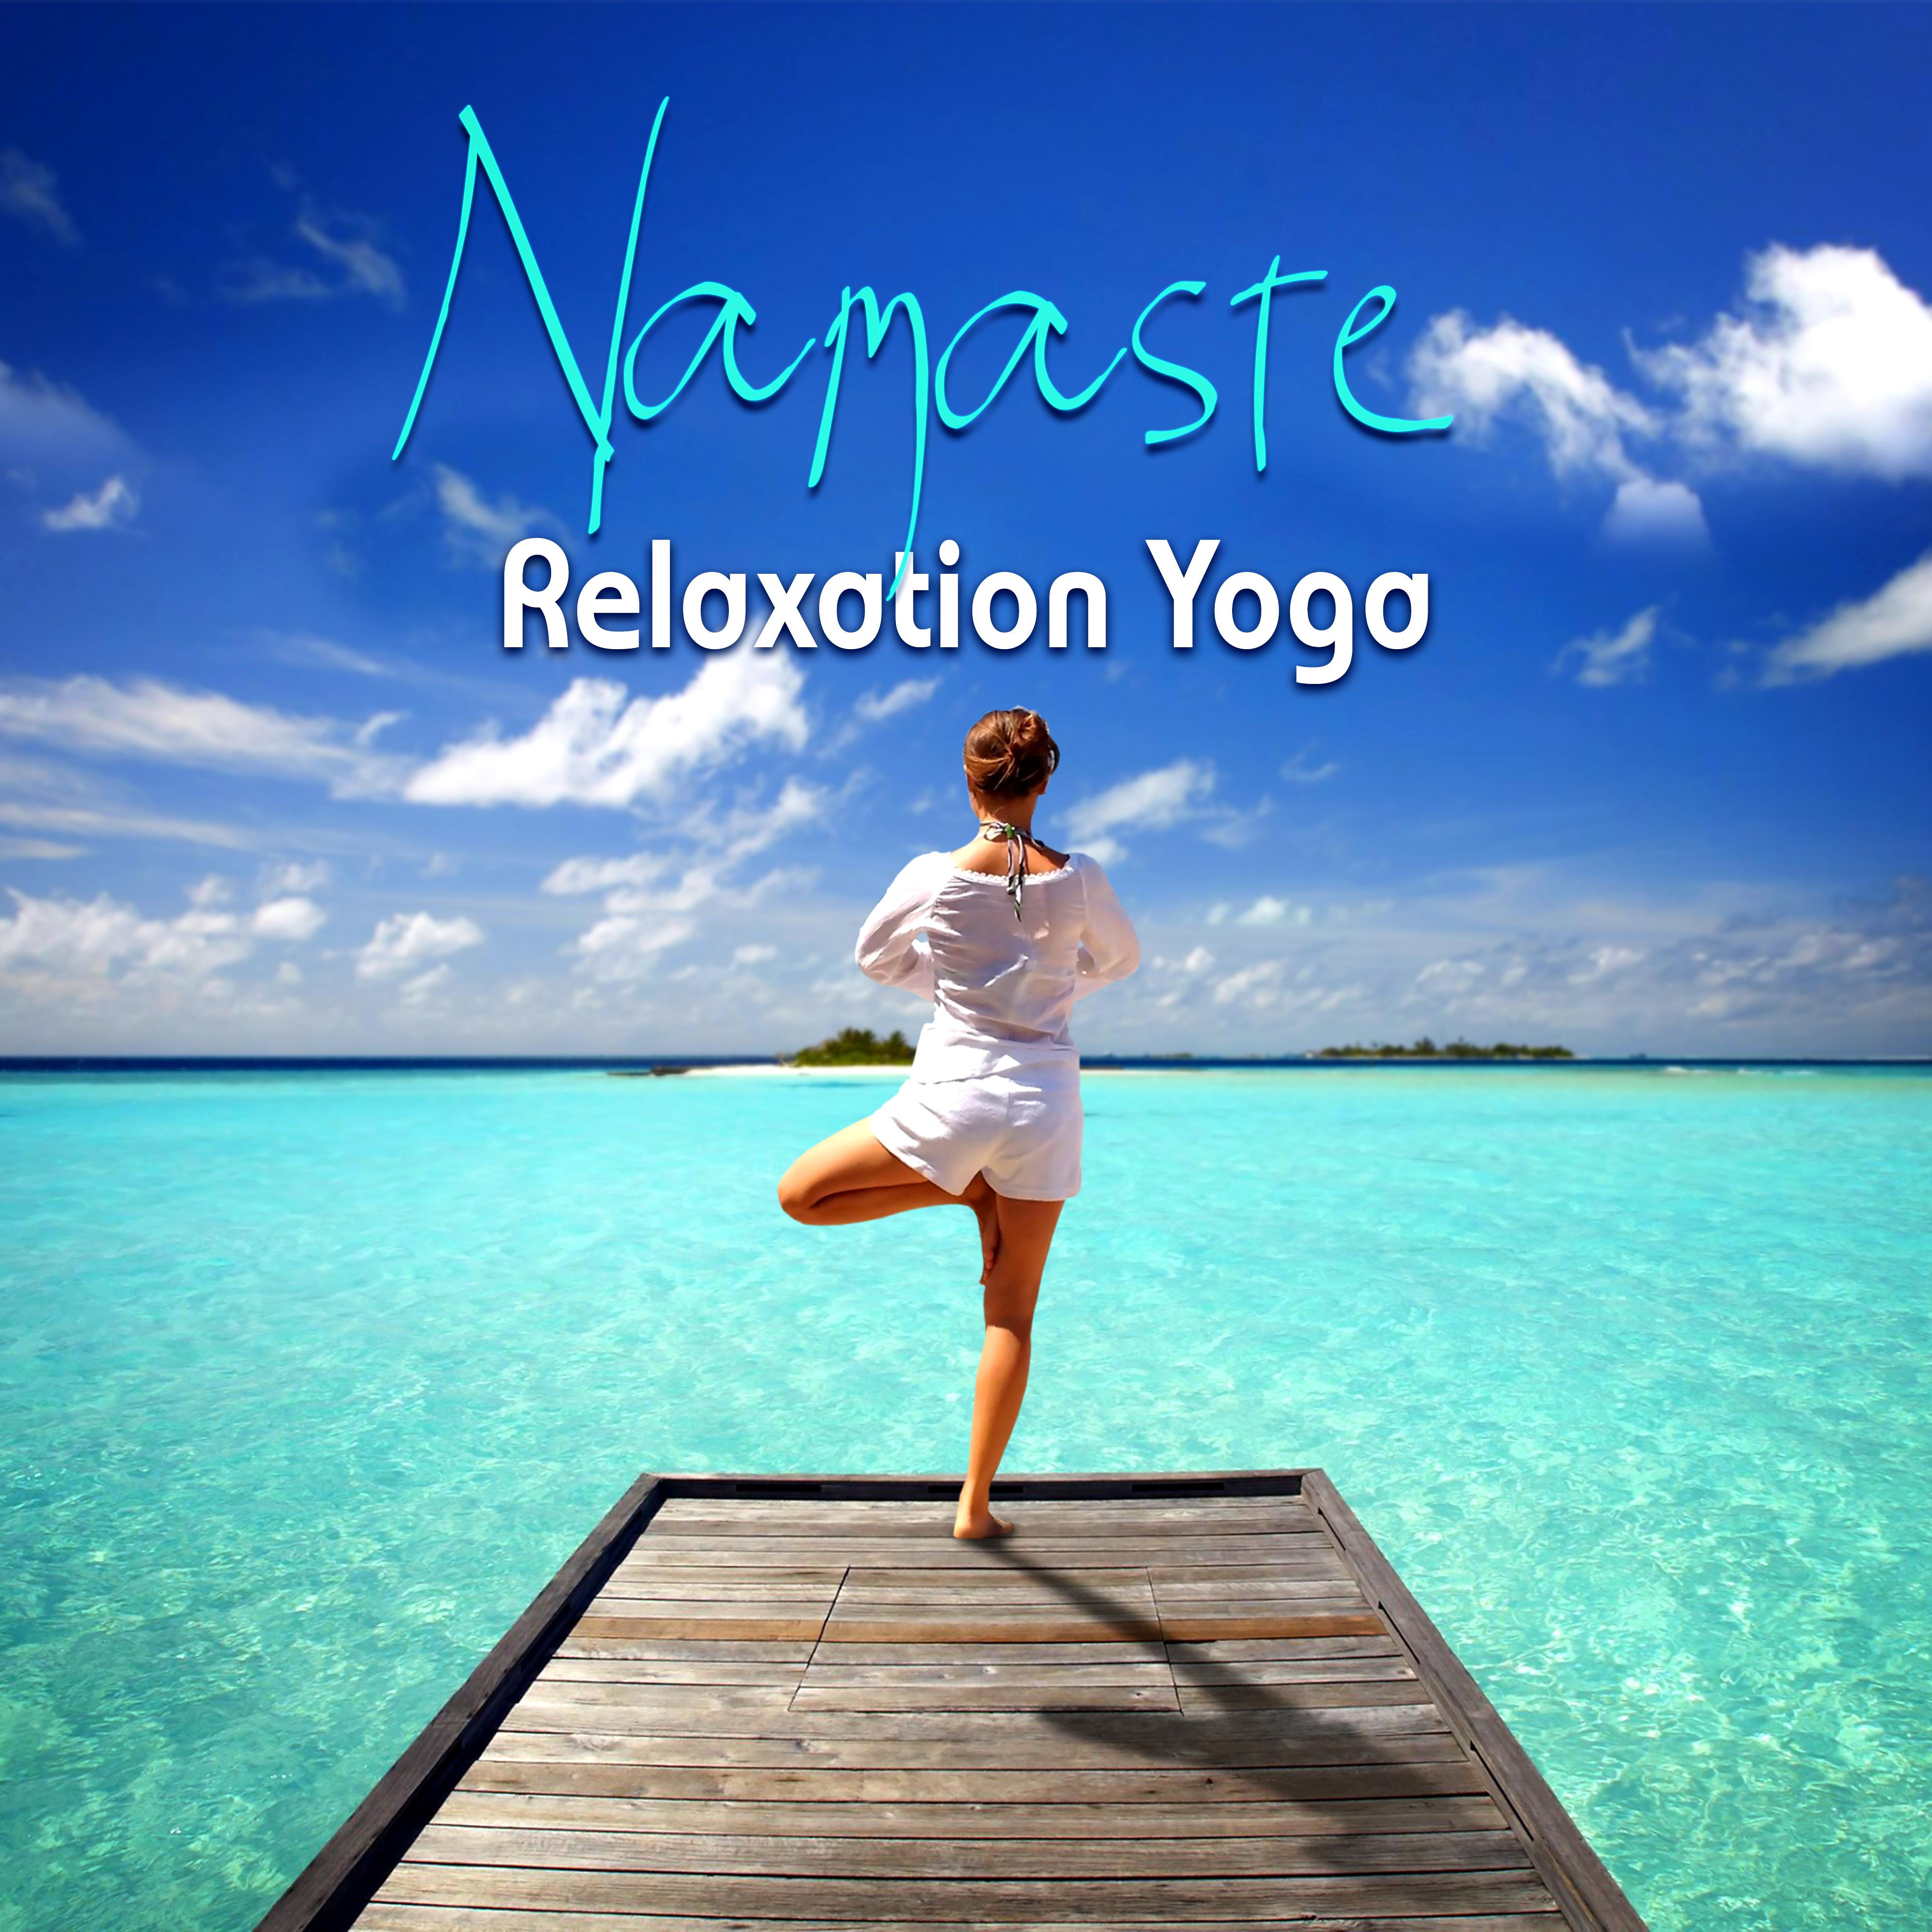 Namaste Relaxation Yoga  Peaceful Music for Yoga Classes and Relaxation, Relax Your Mind, Guided Mindfulness Meditation